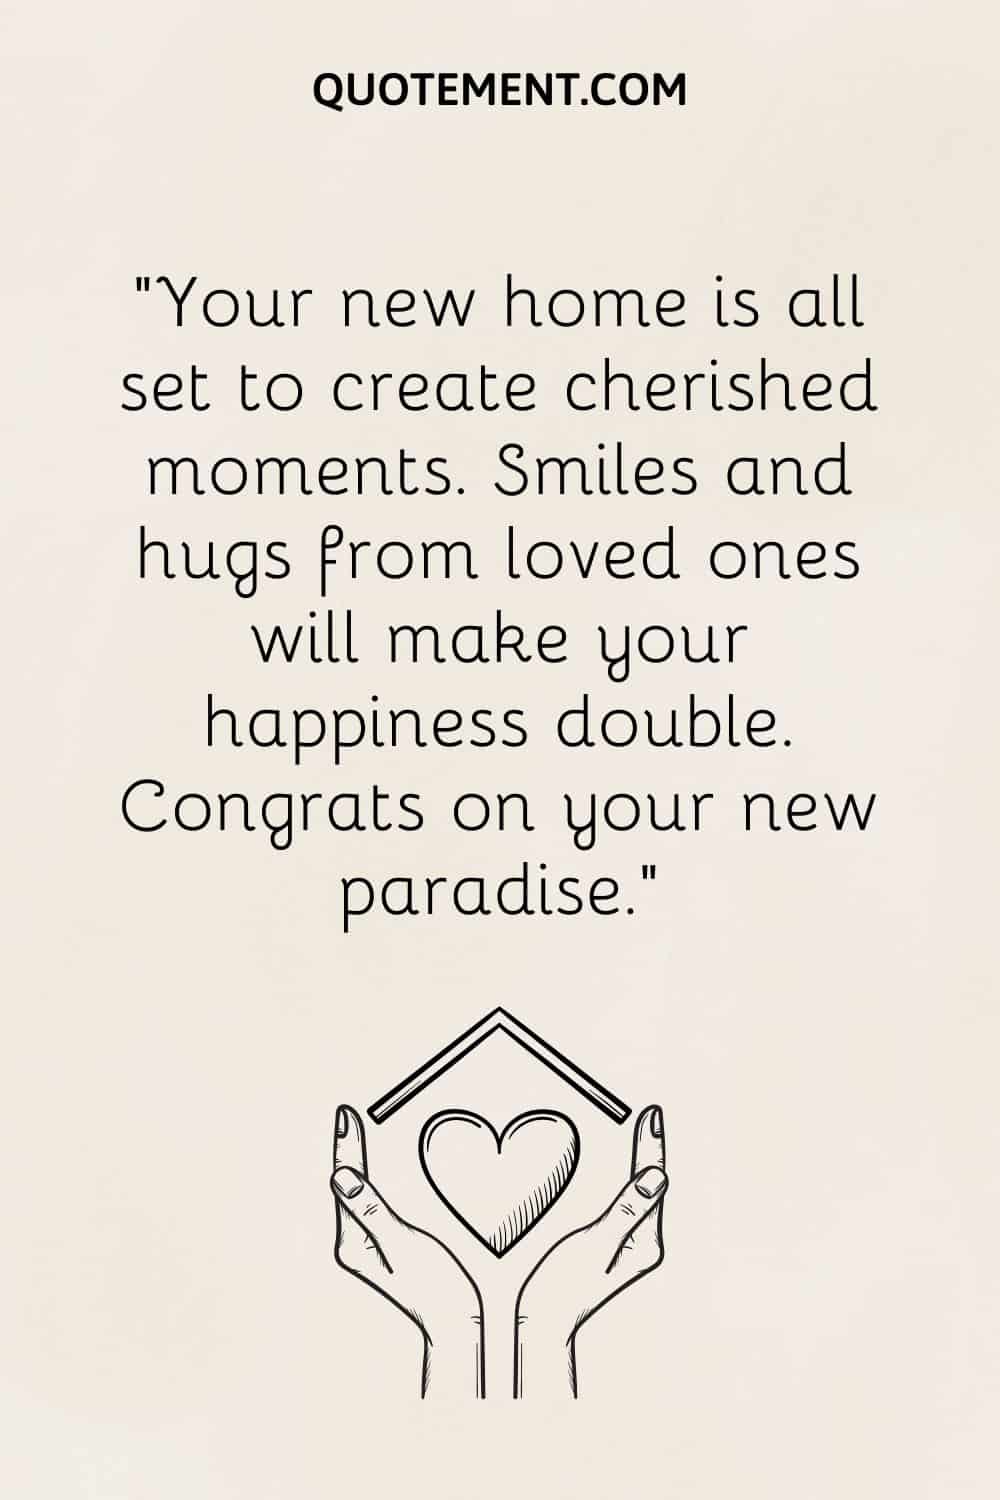 Your new home is all set to create cherished moments